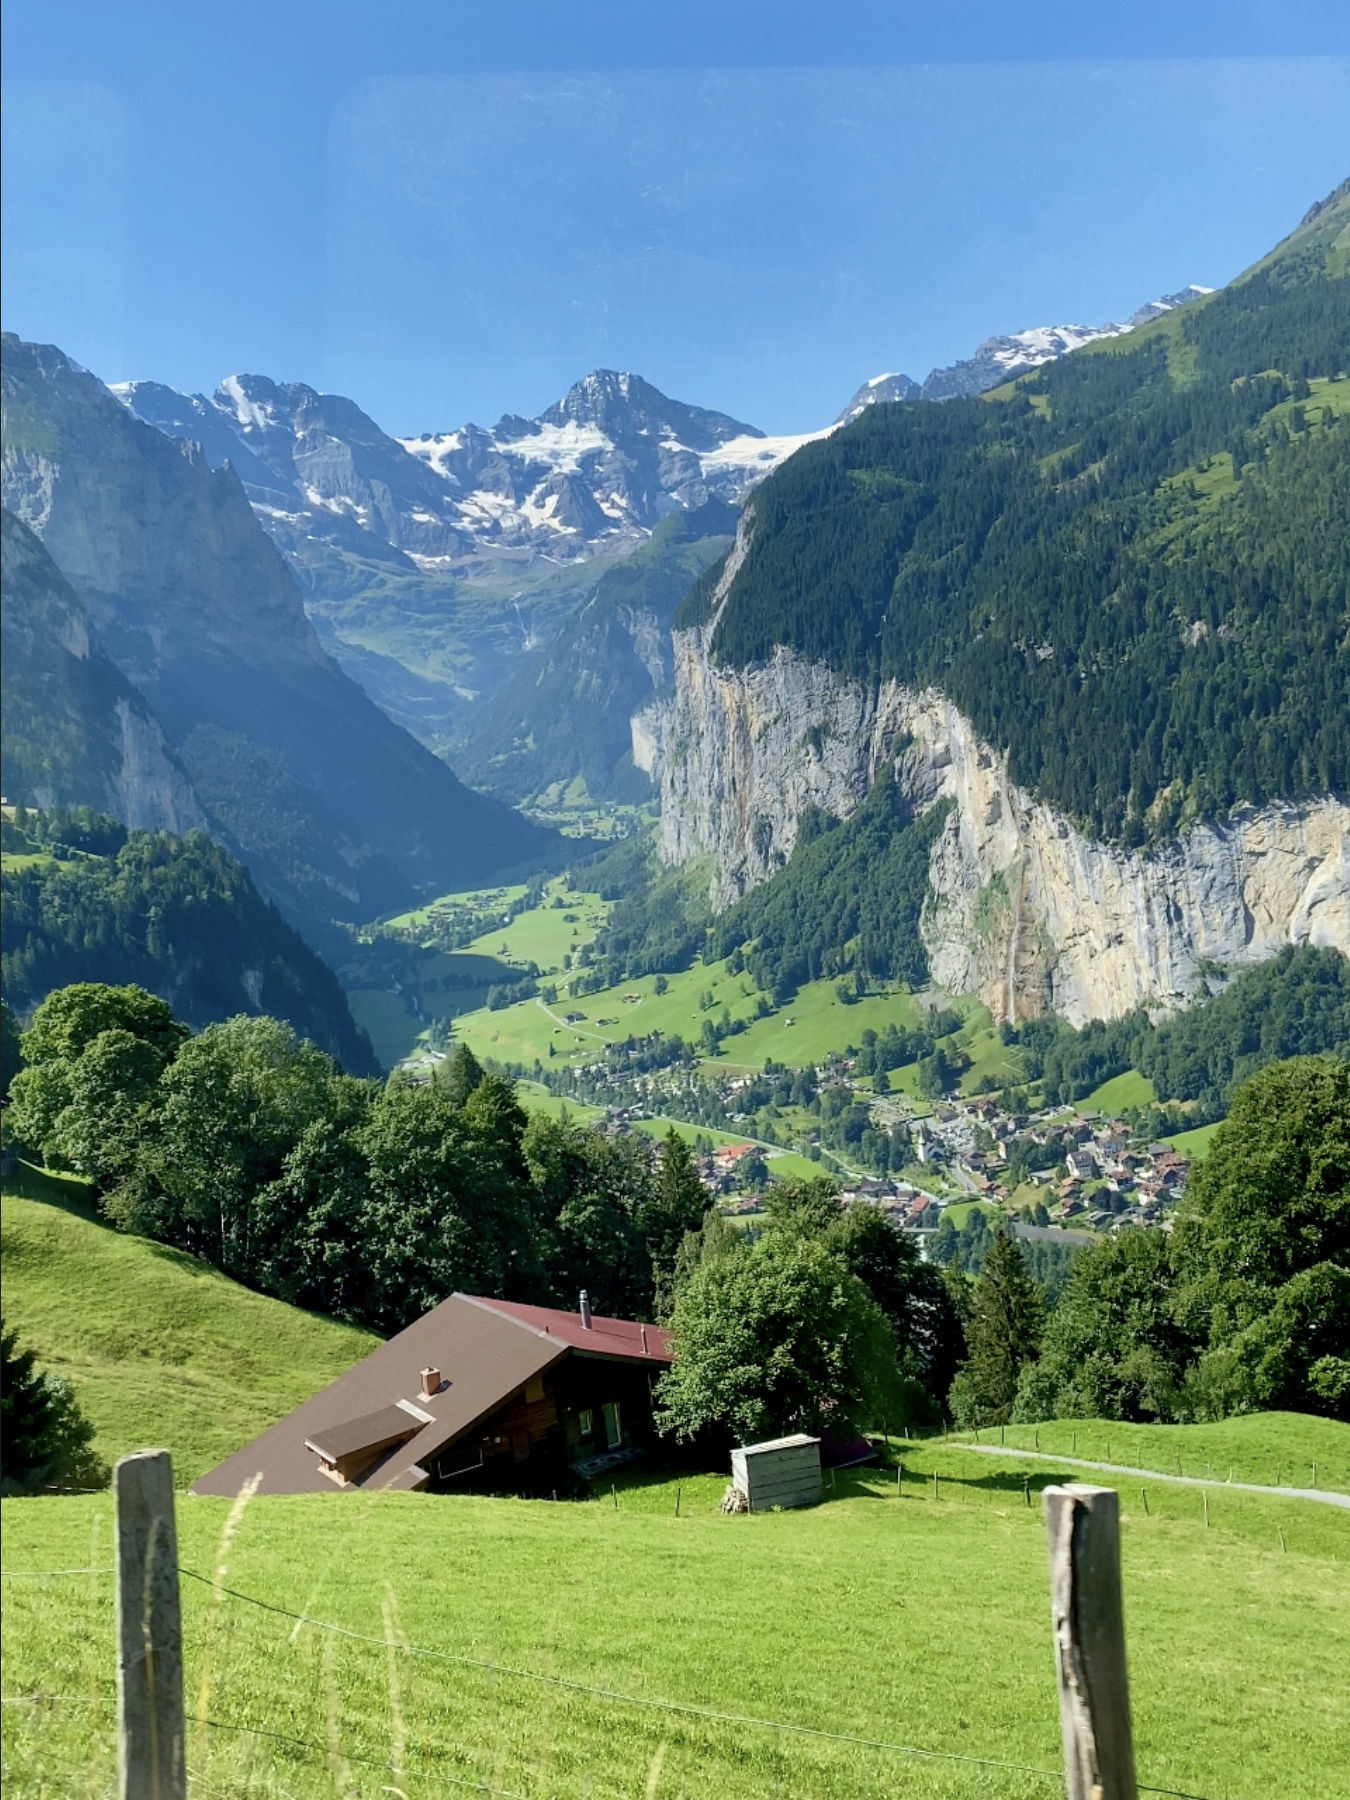 Second Road Trip Part 01: Our 5 Day Itinerary in Switzerland